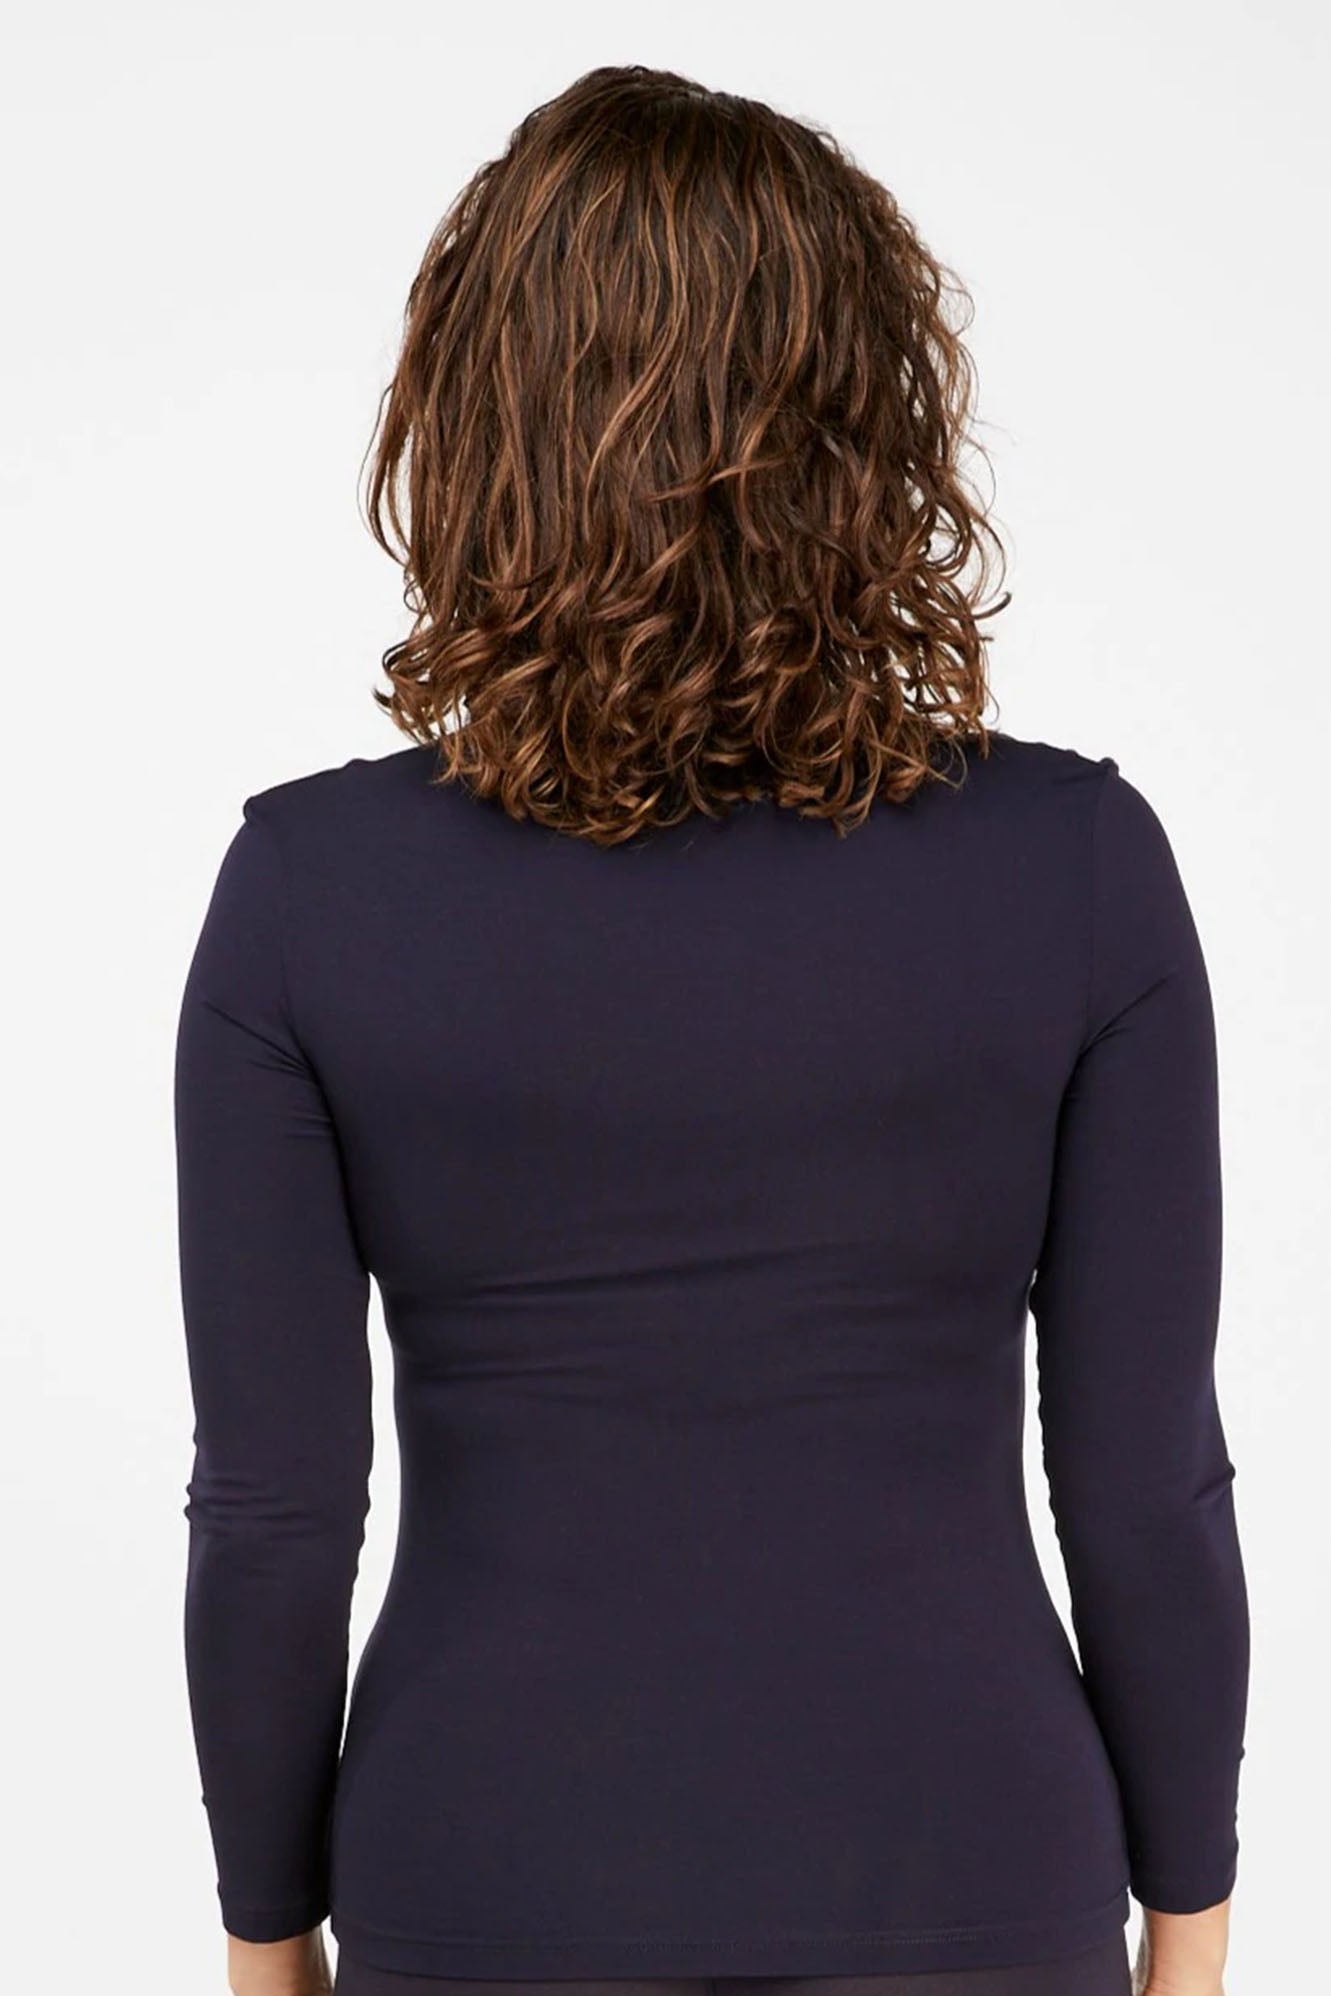 Woman wearing French Navy Tani Long Sleeve Scoop Neck Tee 79350 back view